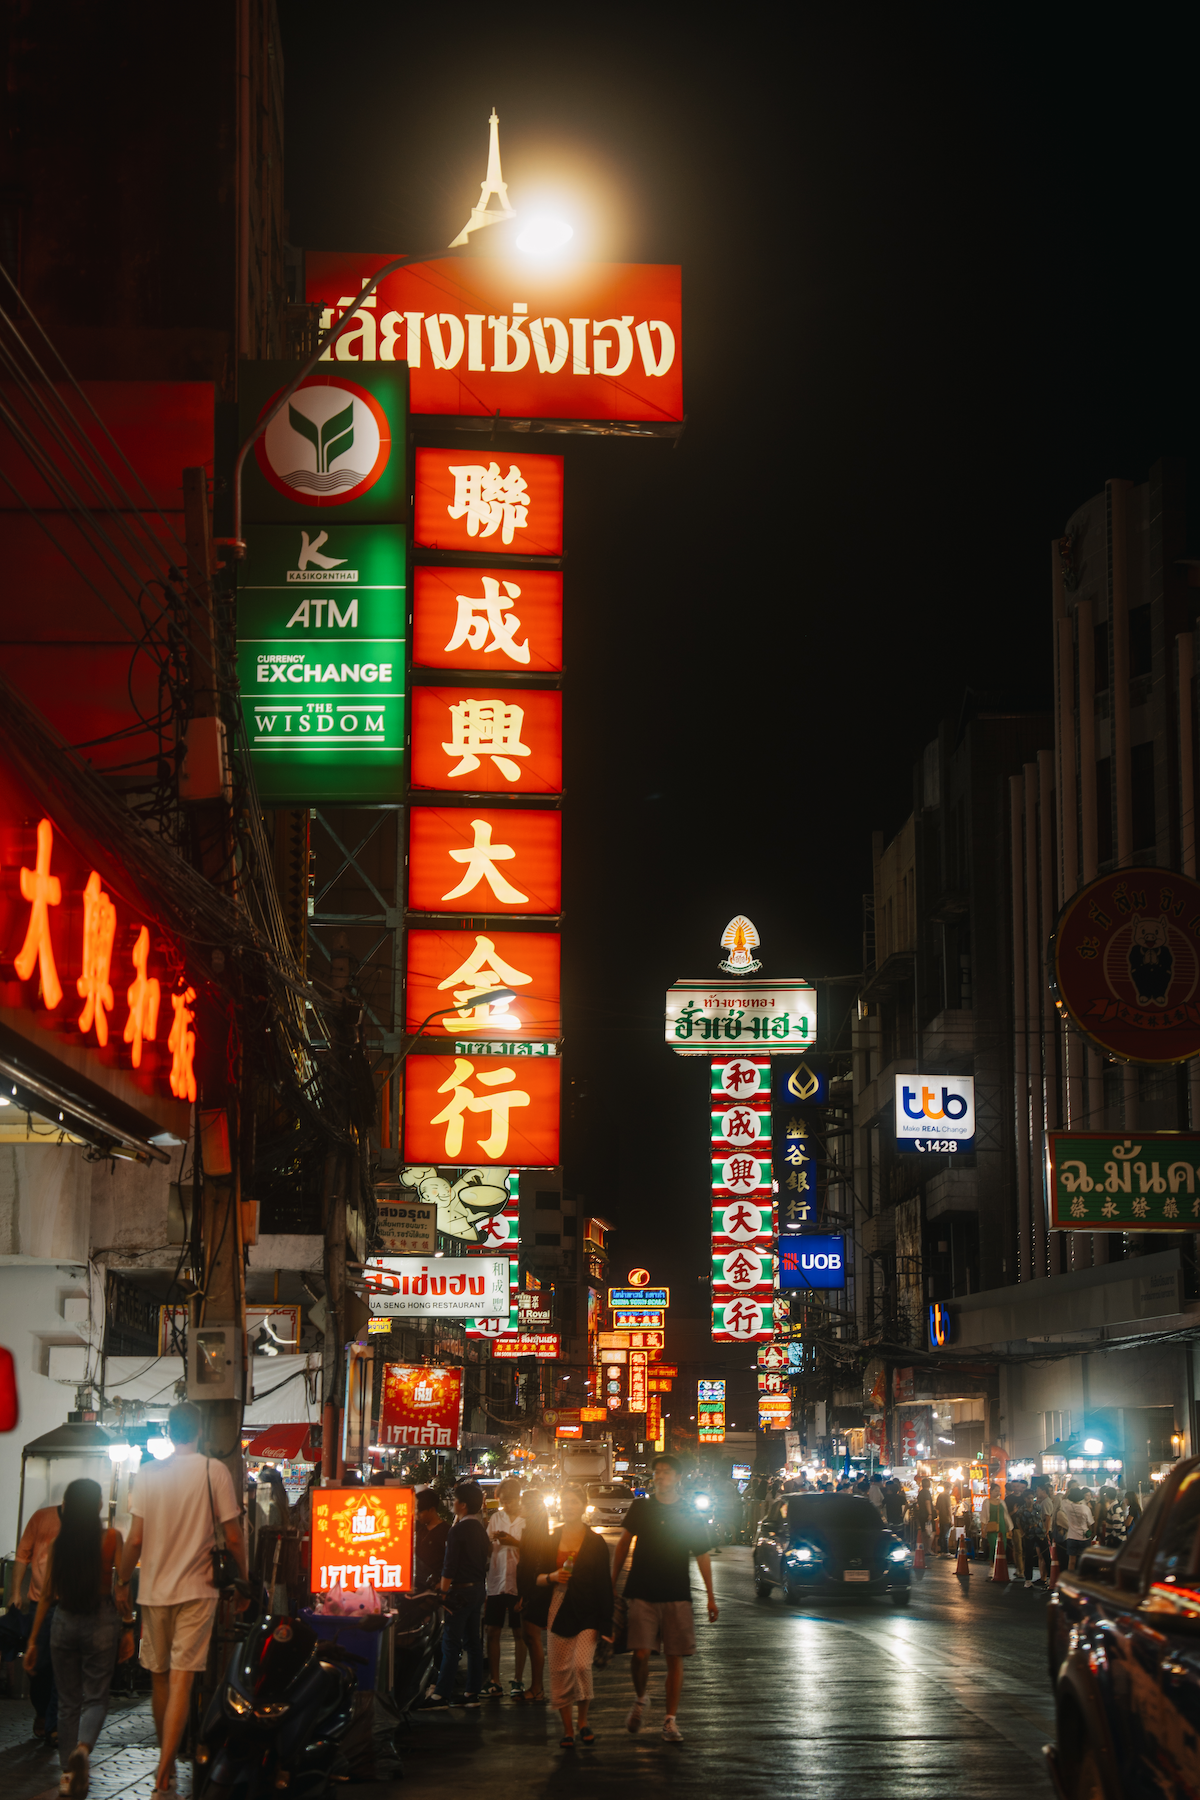 Busy street at night with bright store signages and many pedestrians